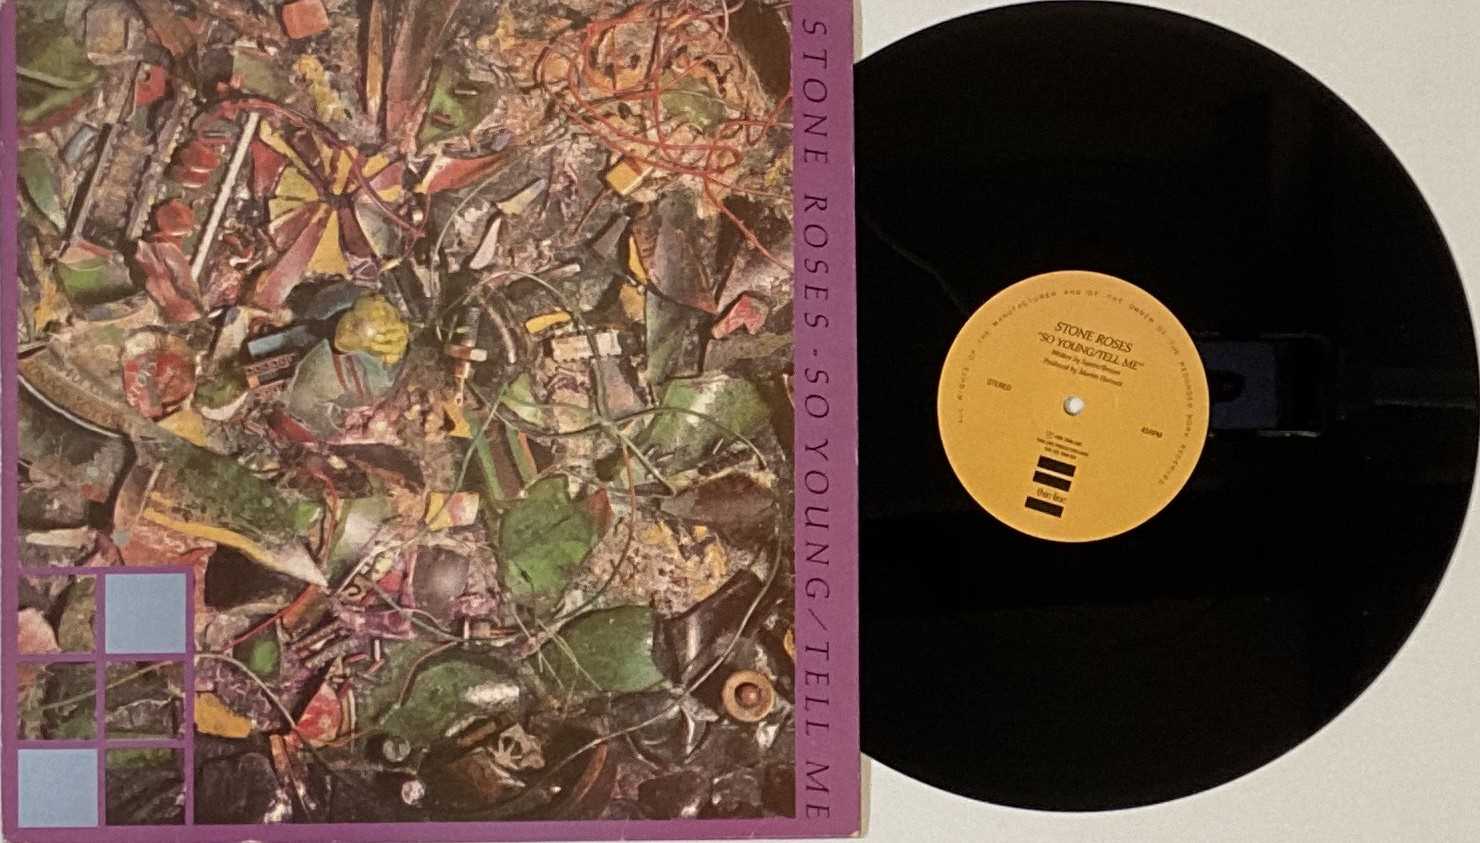 Lot 316 - THE STONE ROSES - SO YOUNG/TELL ME 12" (ORIGINAL UK RELEASE - THIN LINE THIN 001)